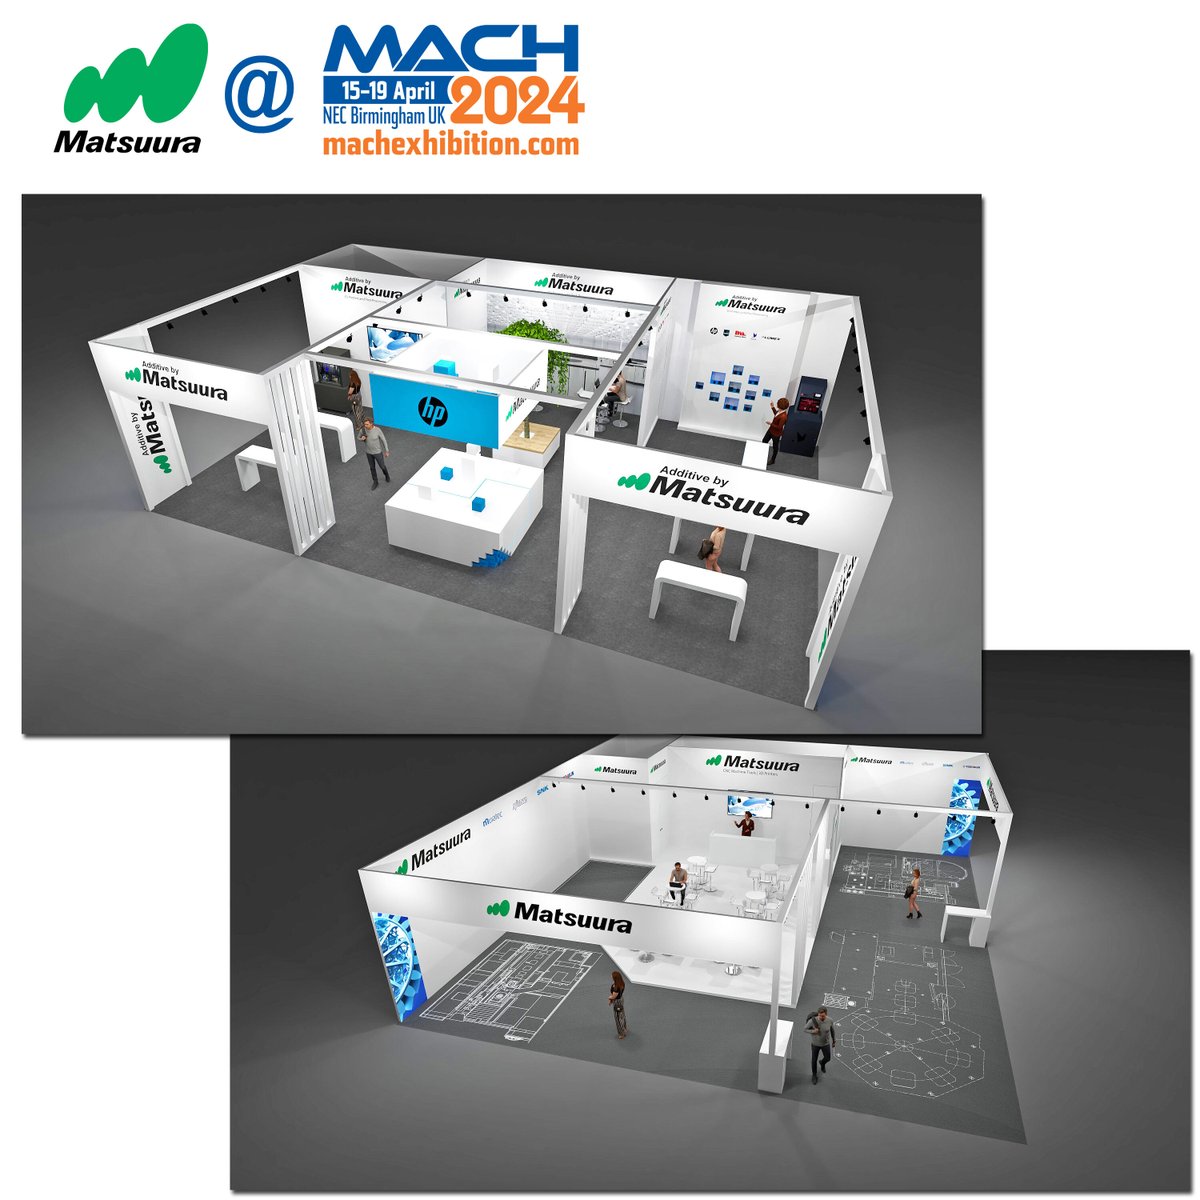 Matsuura at MACH.

2 great stands. 6 great machines. Best coffee in show.

Stands 20-442 (CNC) and 20-542 (3D). See you next week!

#additivebymatsuura #cncmachining #5axis #mach2024 #ukmfg #automatedpalletpool #additivemanufacturing #3dprinting